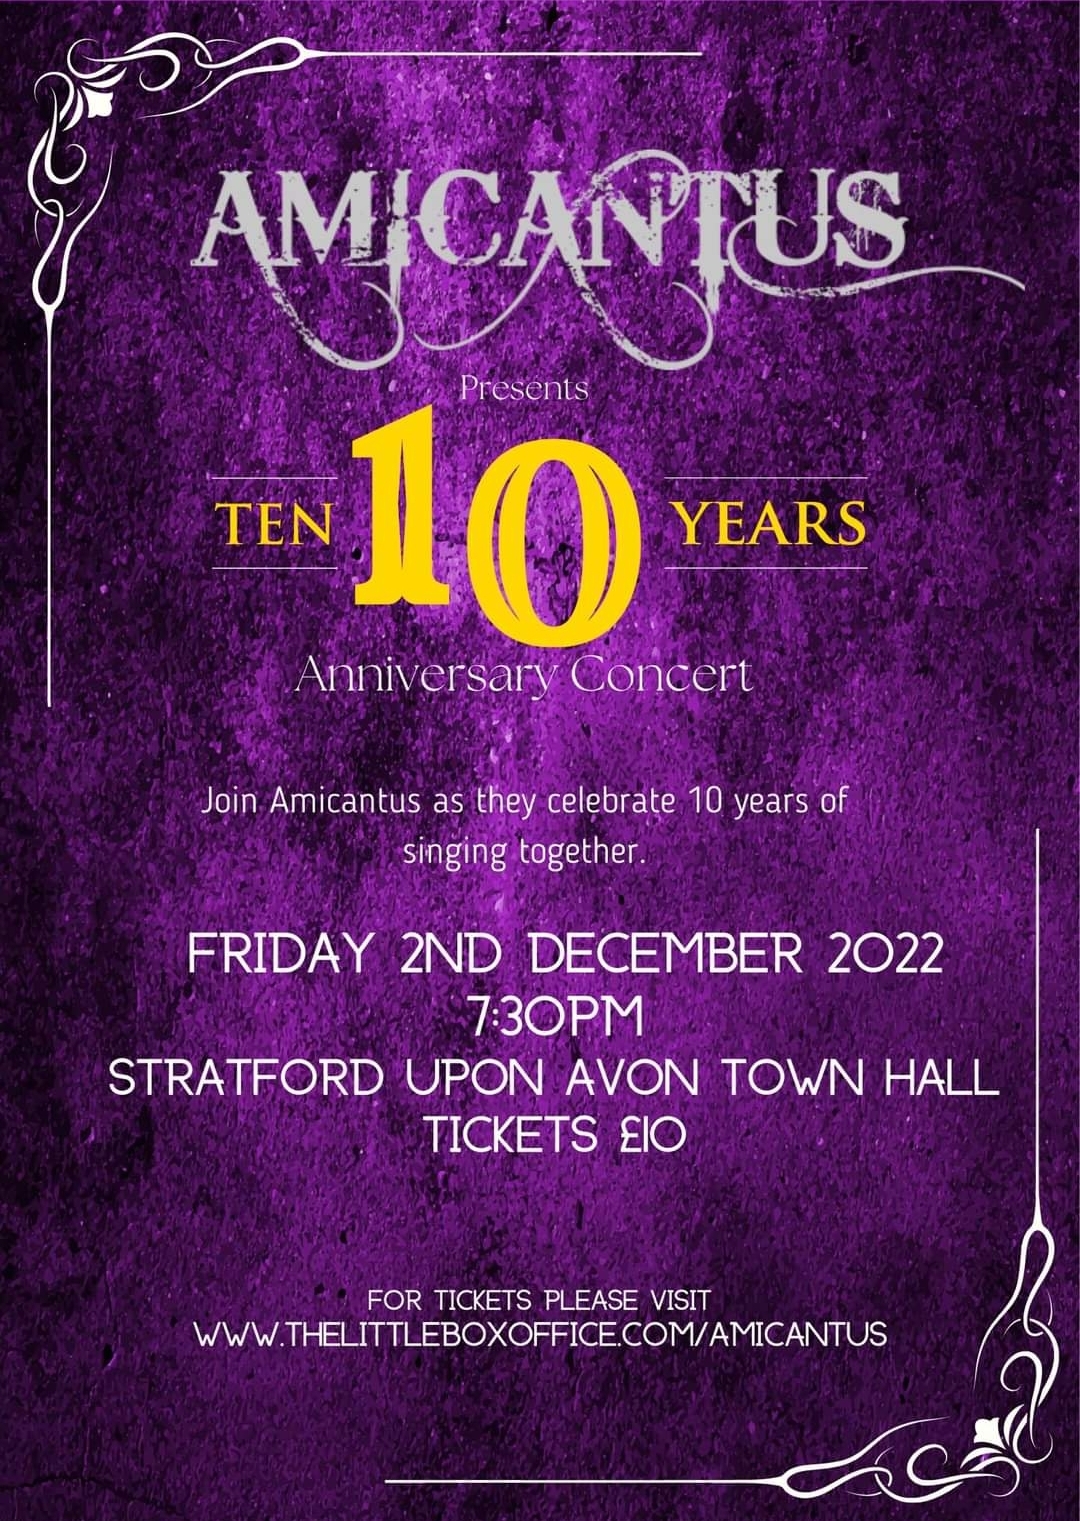 Amicantus 10 Year Anniversary Concert